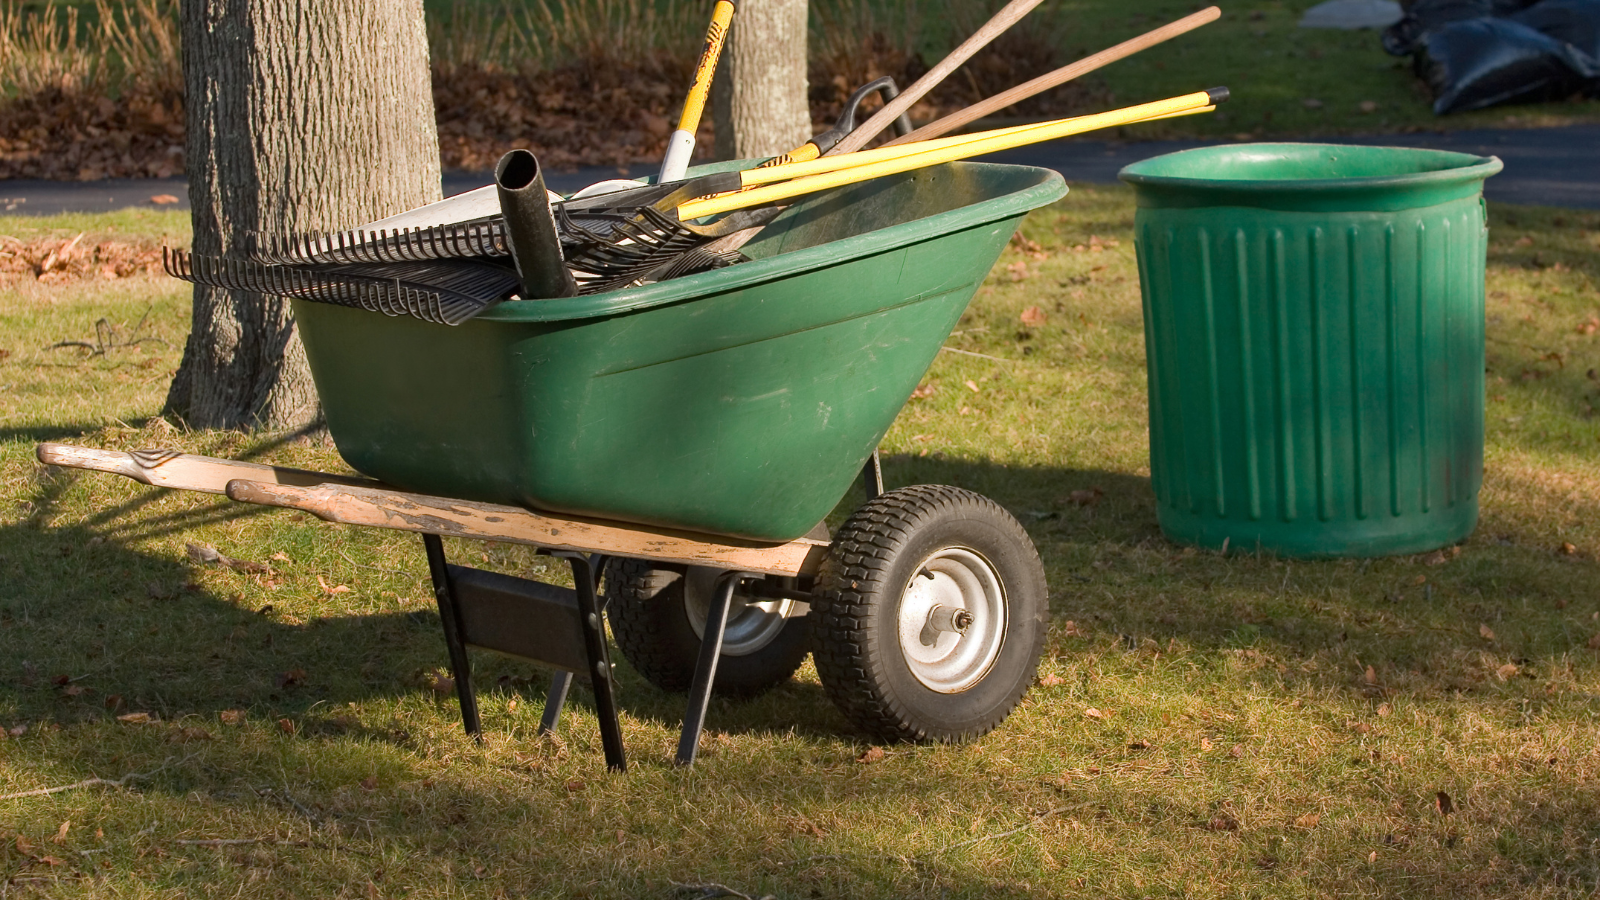 A green wheelbarrow filled with leaves and a green trash can.